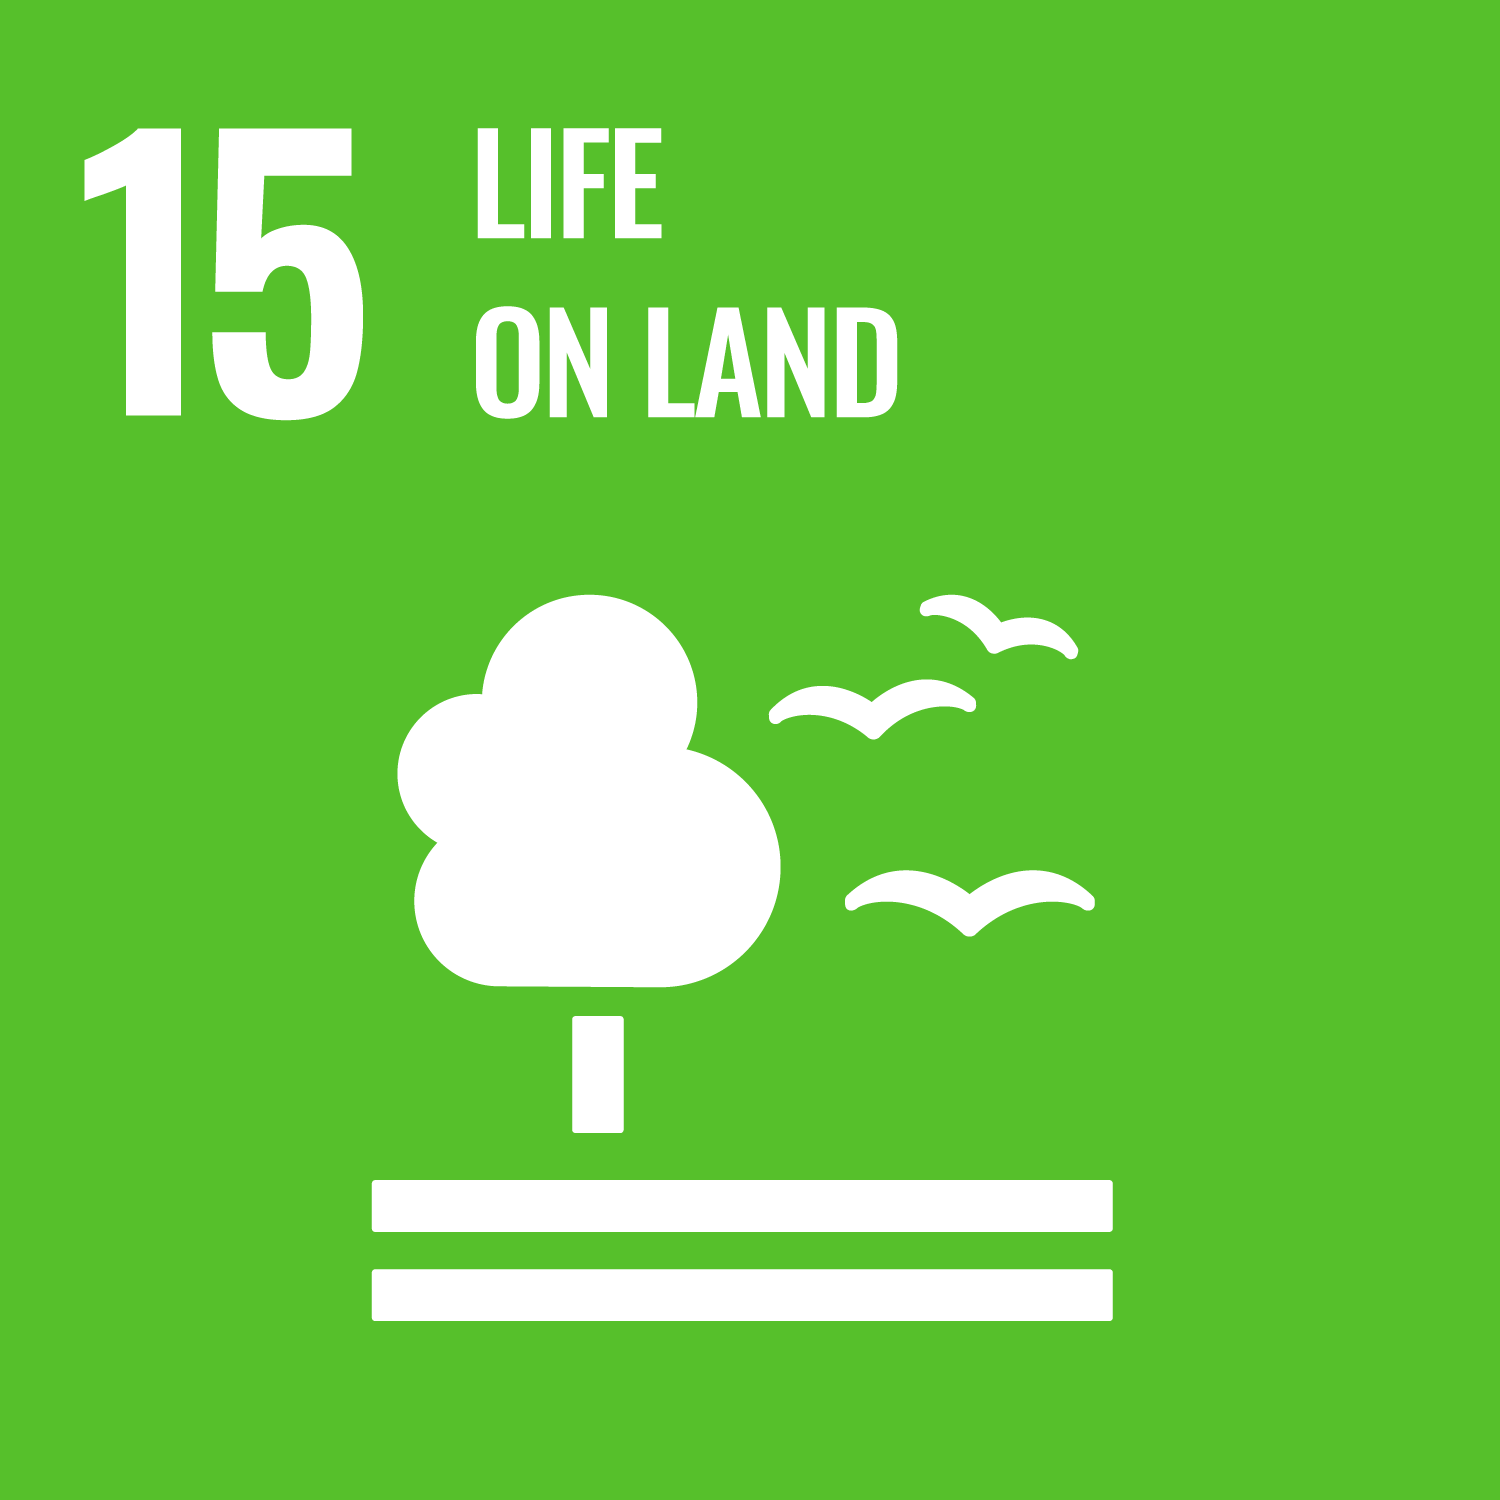 the phrase 15 life on land in white on a green background